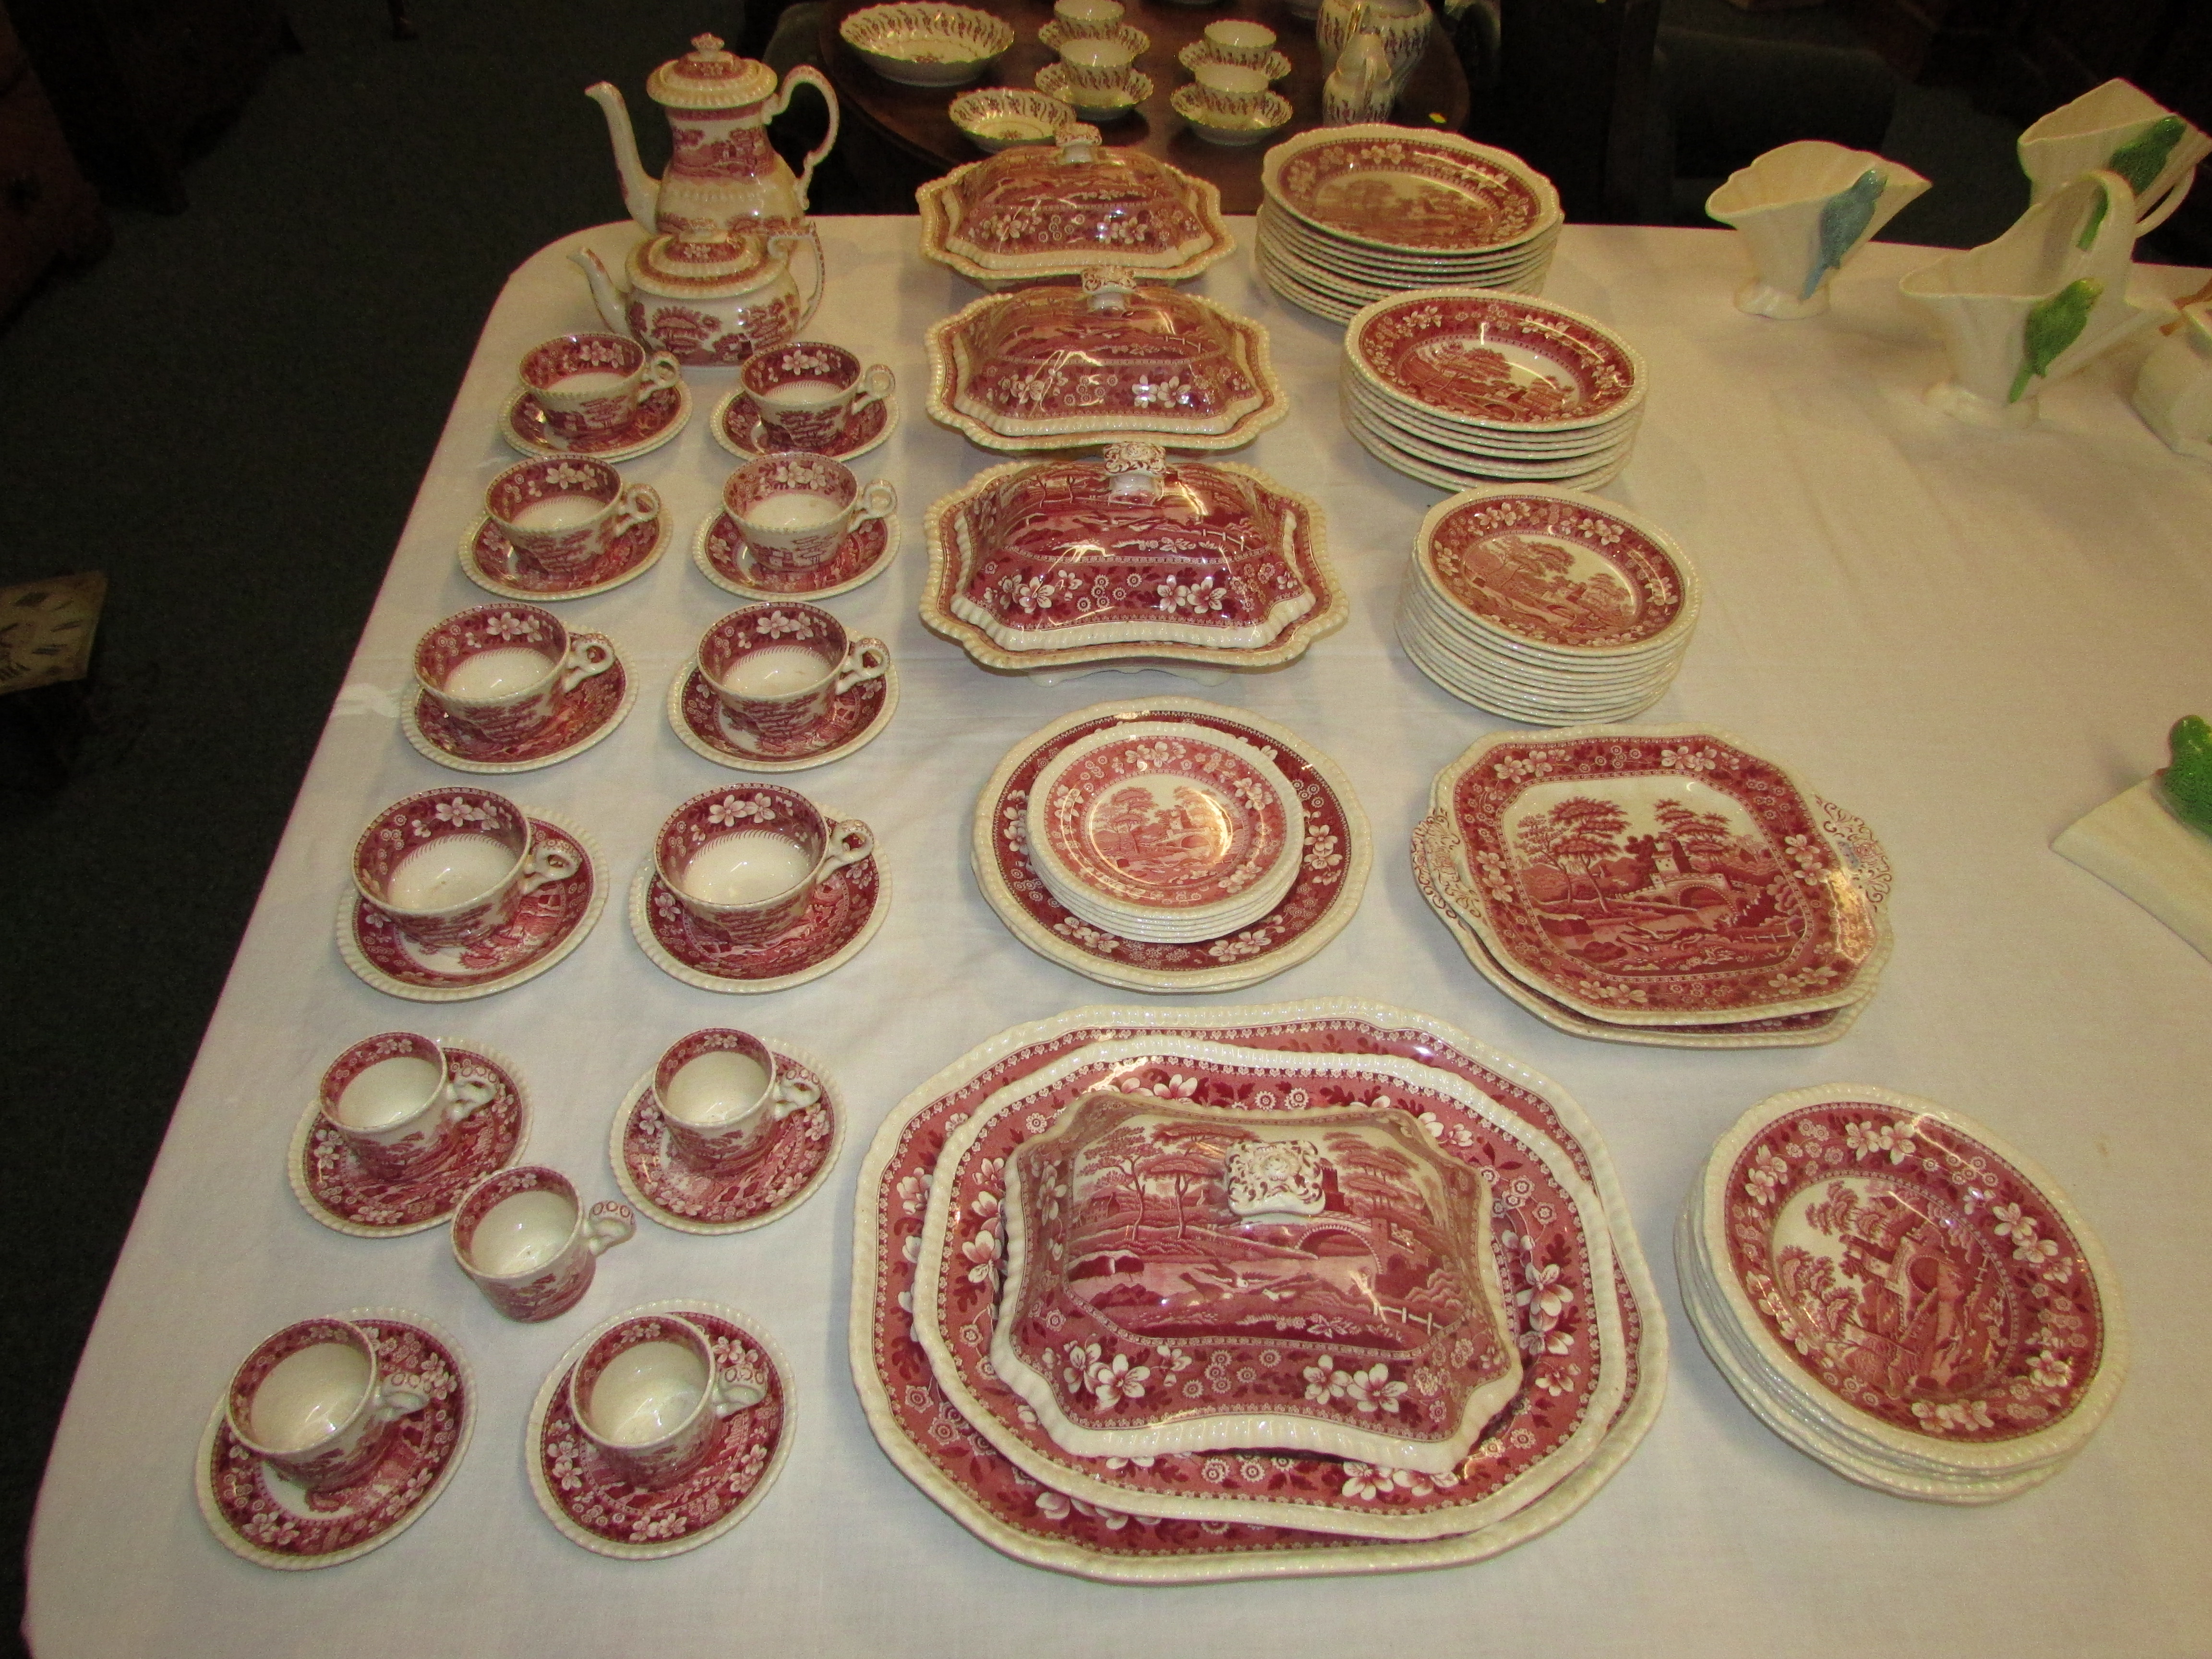 A large selection of Spode dinner and coffee ware in 'Pink Tower' pattern, the components of various